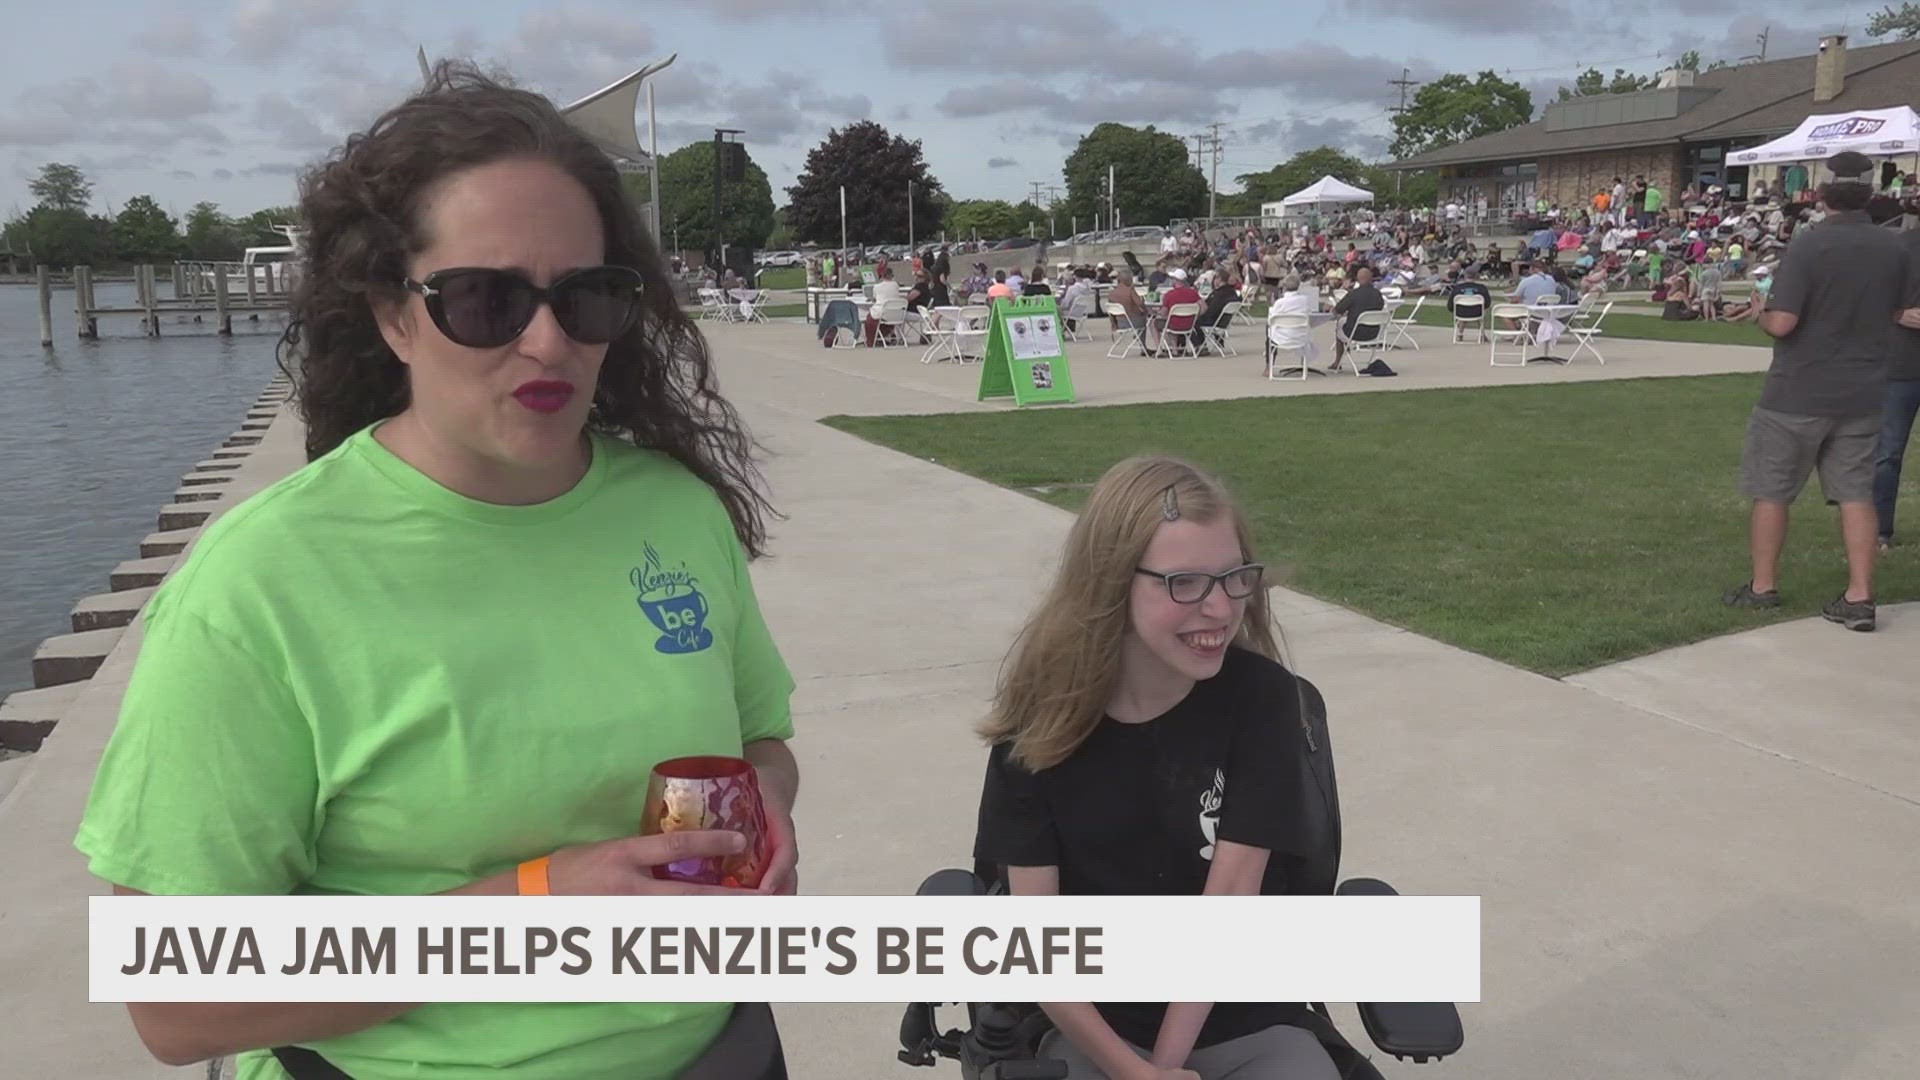 Kenzie's Be Cafe gives people with disabilities meaningful employment, along with life skills and job training.